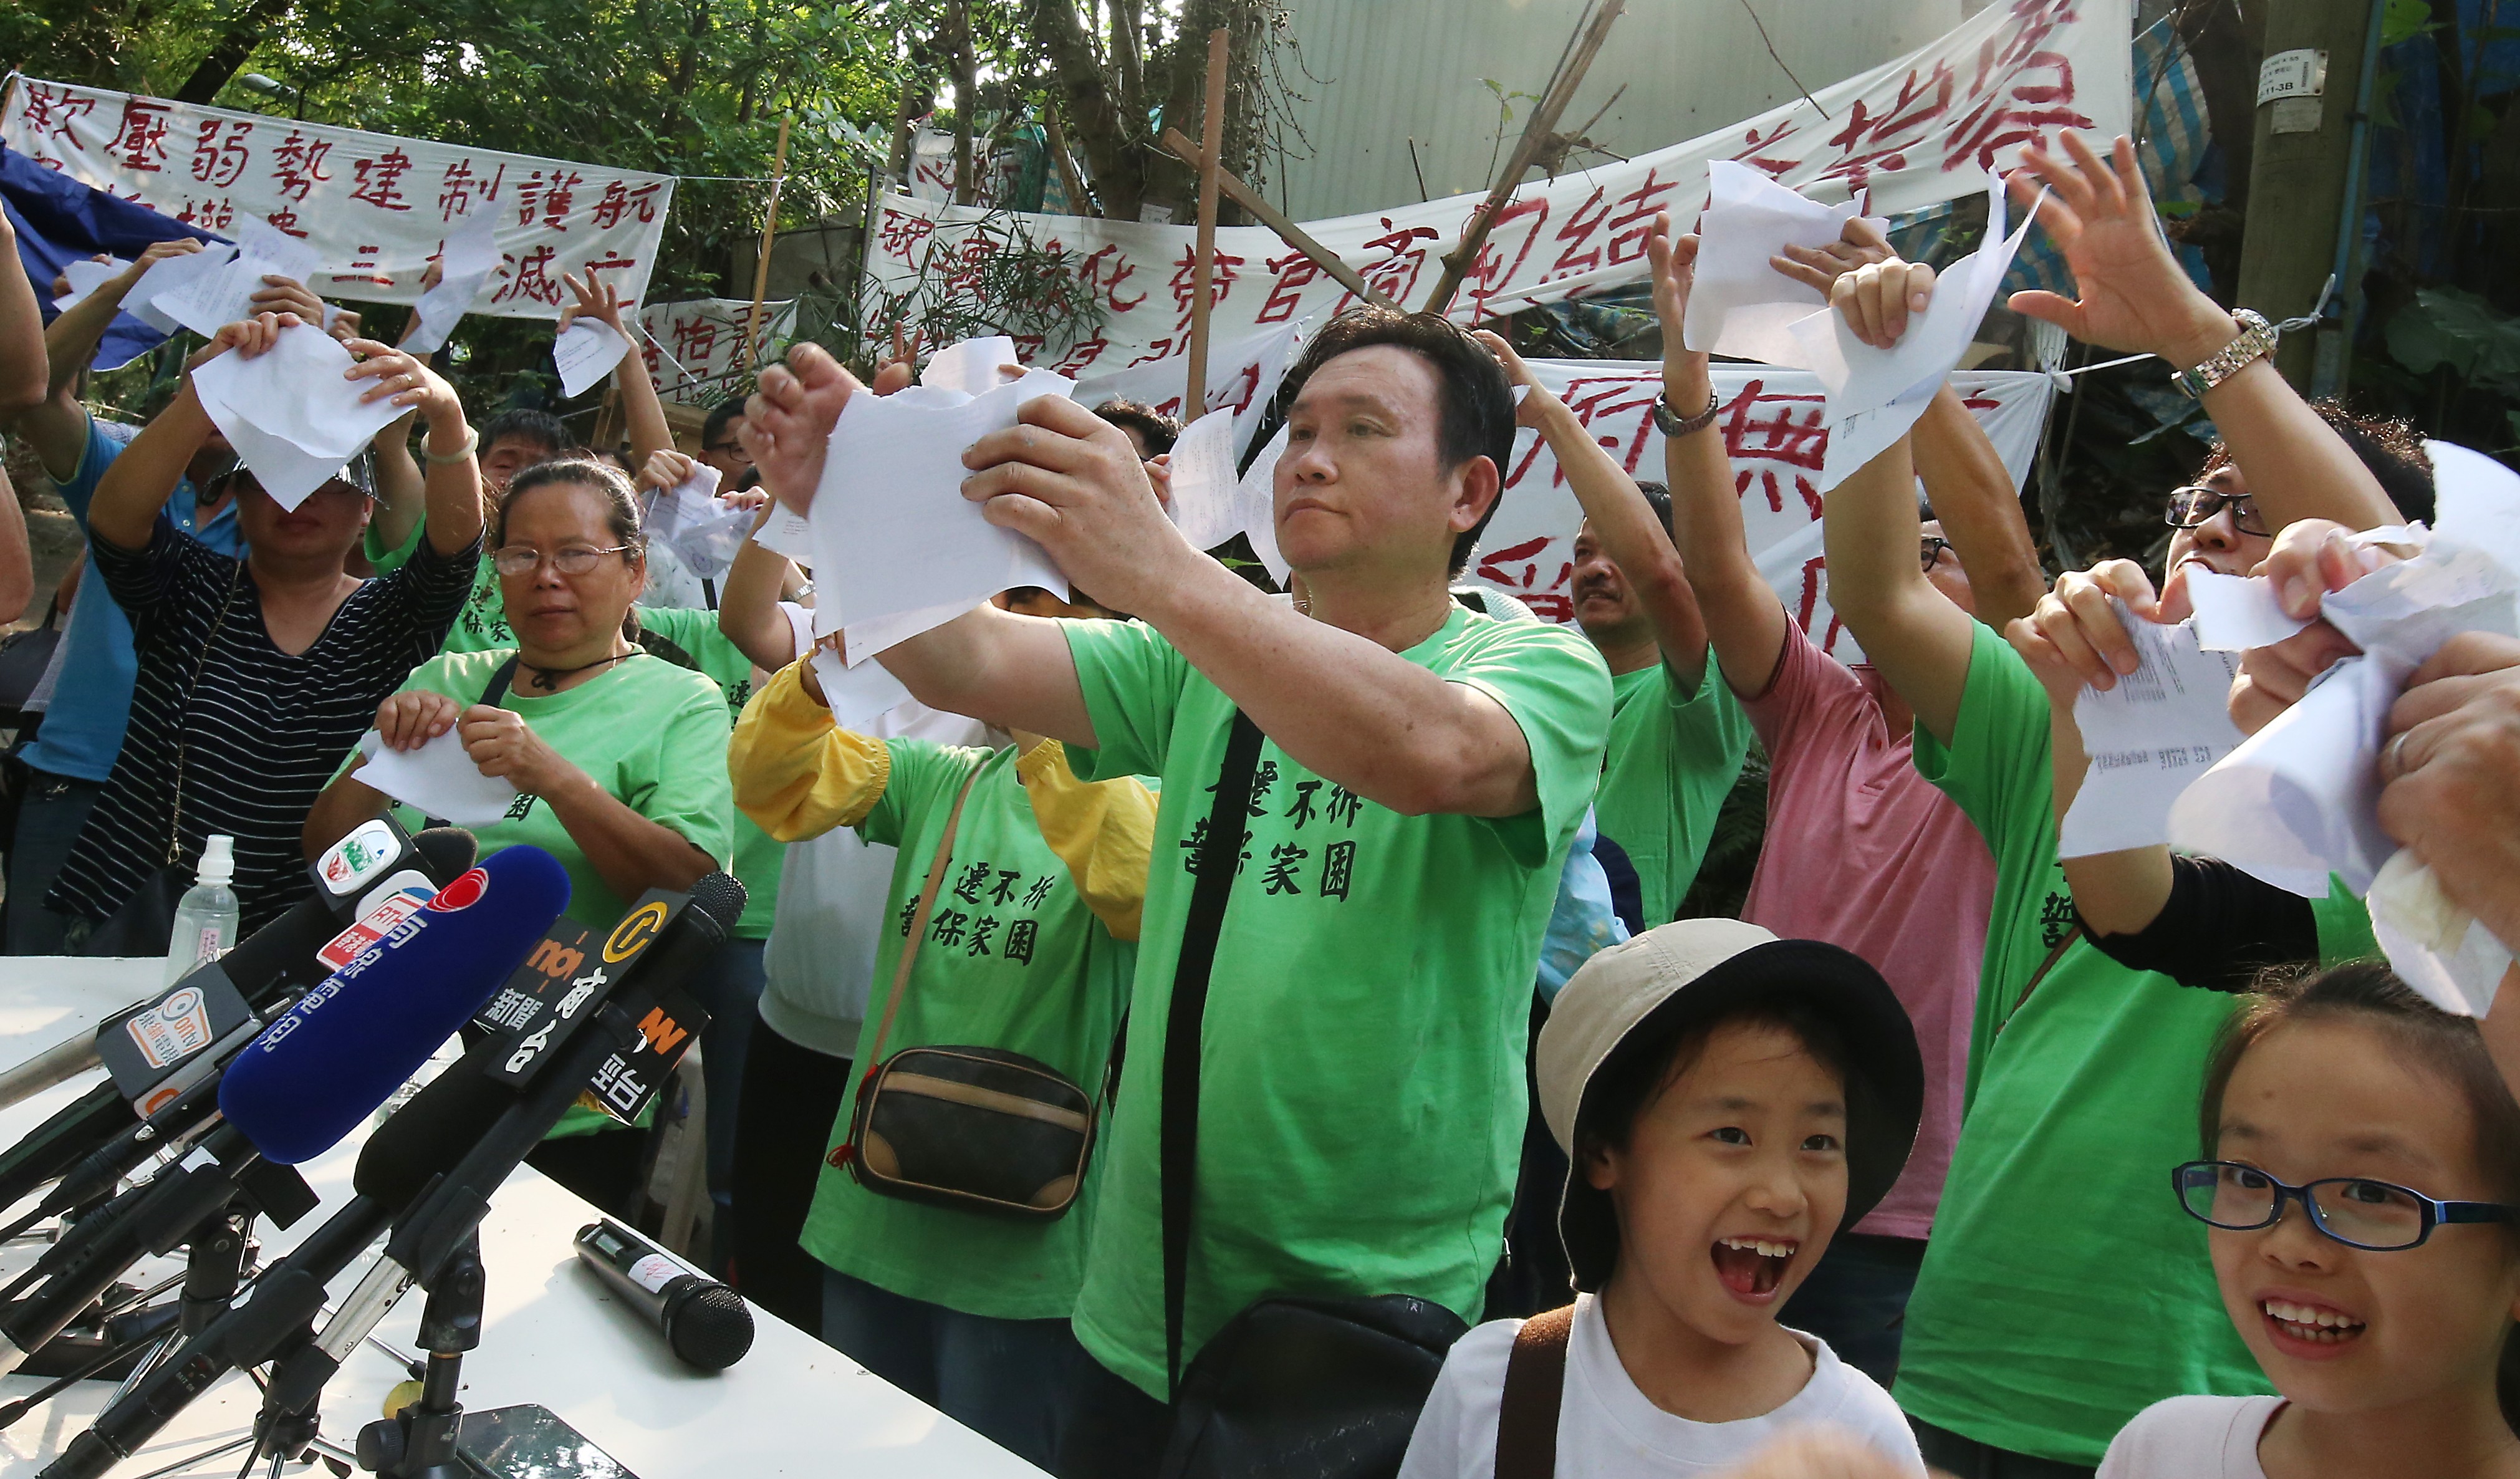 Residents from Wang Chau tearing up government notices about the land plan. Photo: David Wong